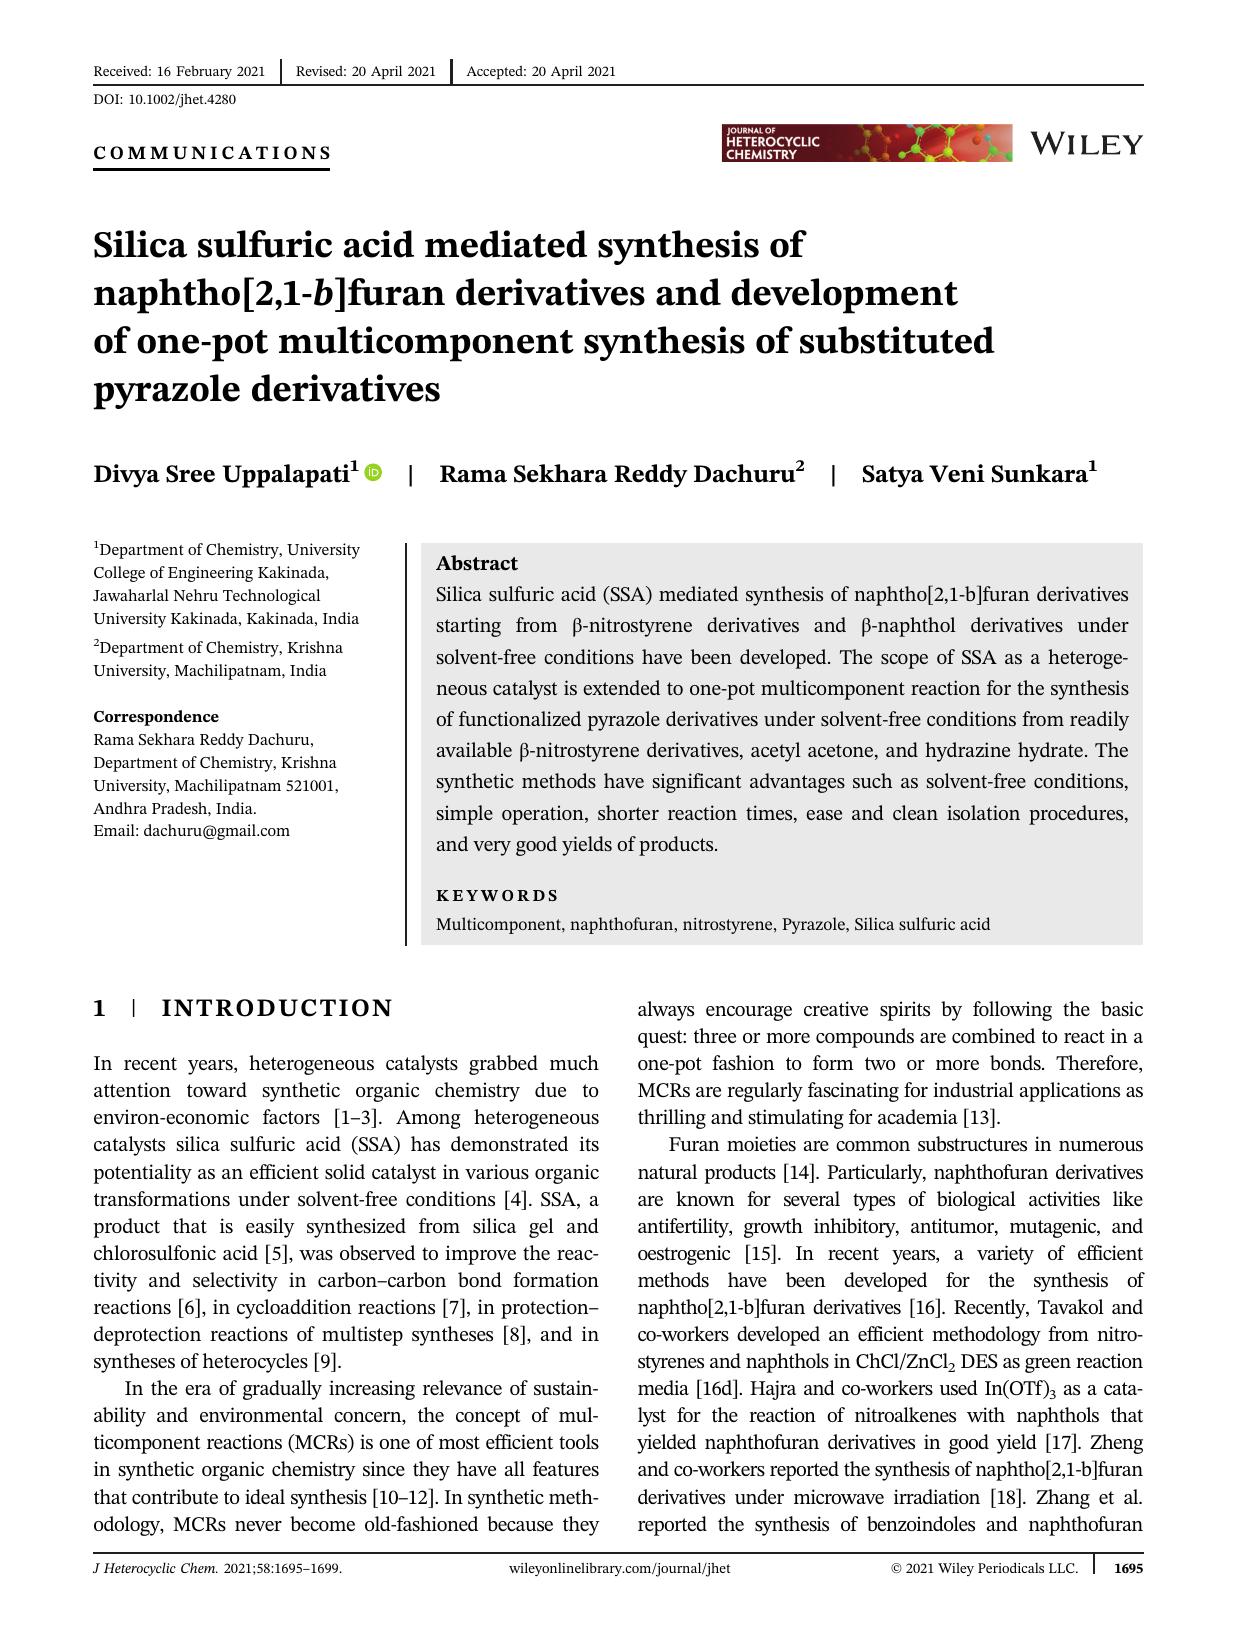 Silica Sulfuric Acid Mediated Synthesis of Naphtho[2,1-b]furan Derivatives and Development of One-Pot Multicomponent Synthesis of Substituted Pyrazole Derivatives by Unknown